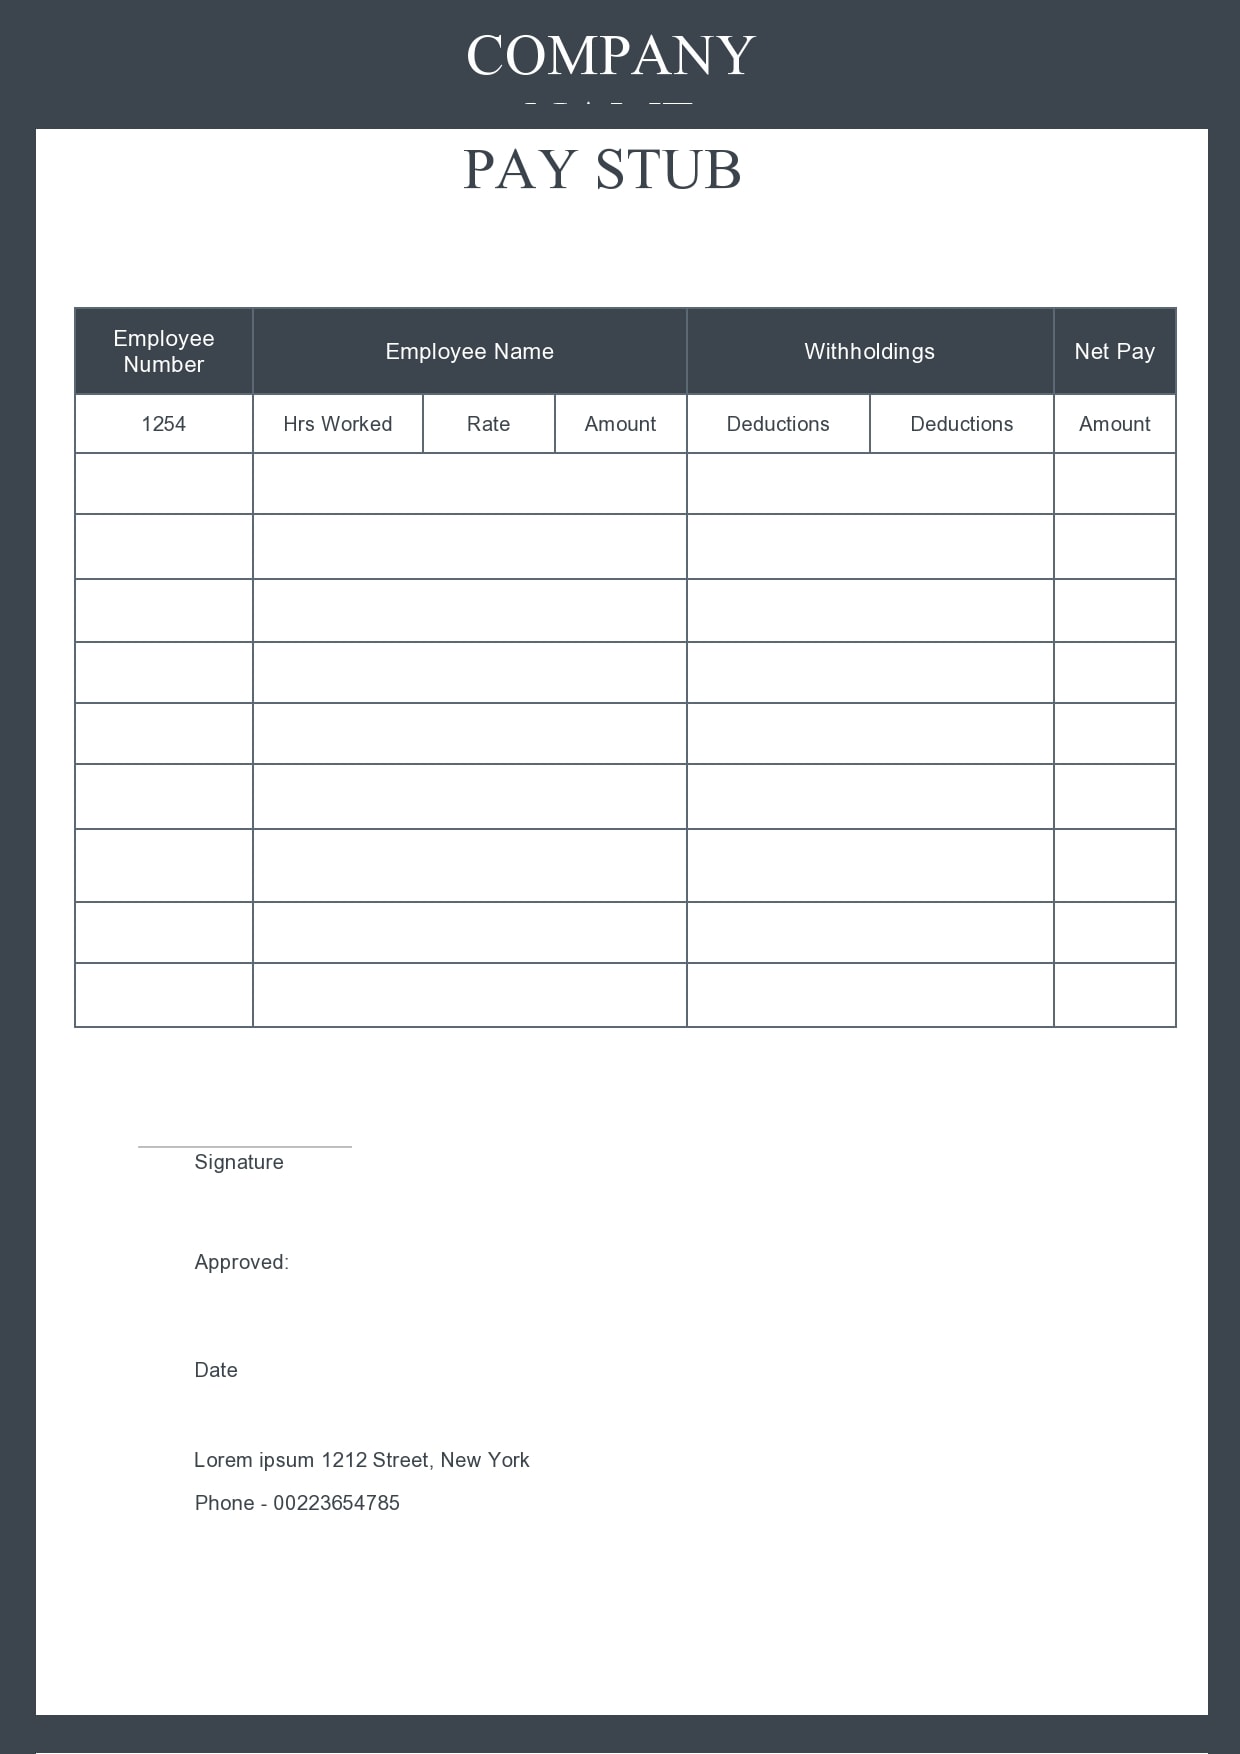 21 Free Pay Stub Templates [Excel, Word] - PrintableTemplates Throughout Blank Pay Stub Template Word